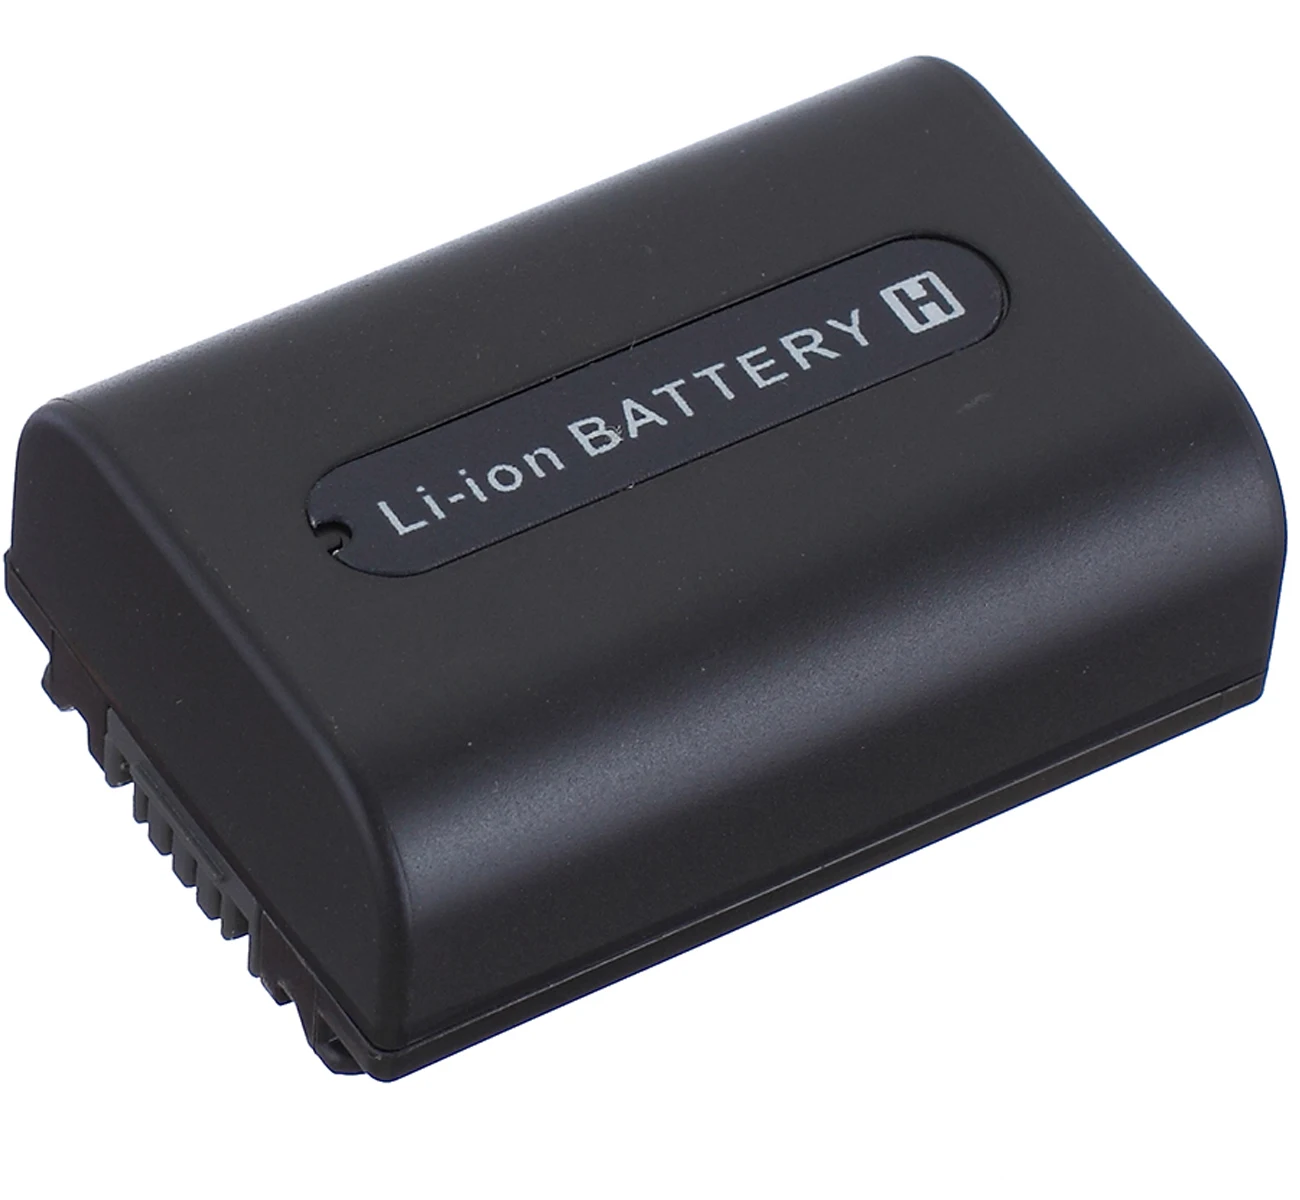 

NP-FH50 Battery Pack for Sony HDR-TG1, HDR-TG3, HDR-TG5, HDR-TG5V, HDR-TG7, HDR-TG7V Handycam Camcorder